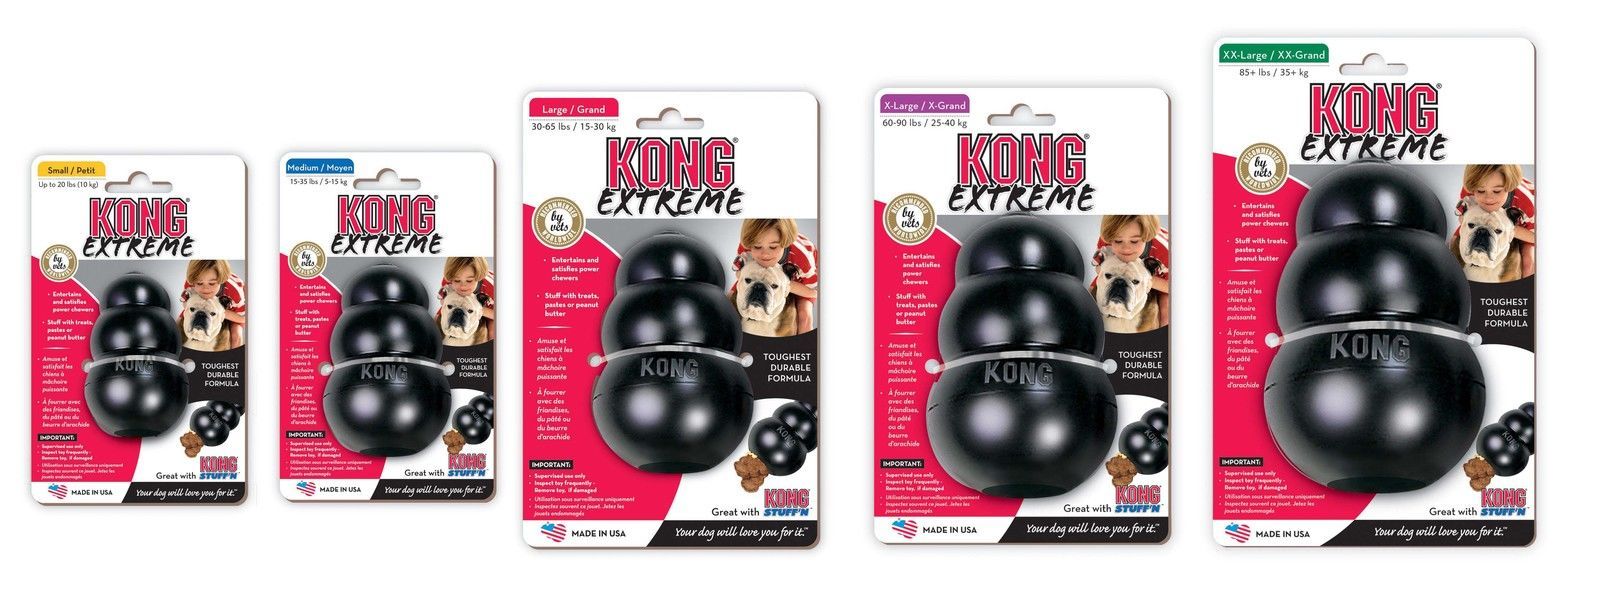 KONG Classic Extreme Black Interactive Dog Toy - for Tough Dogs! image 2